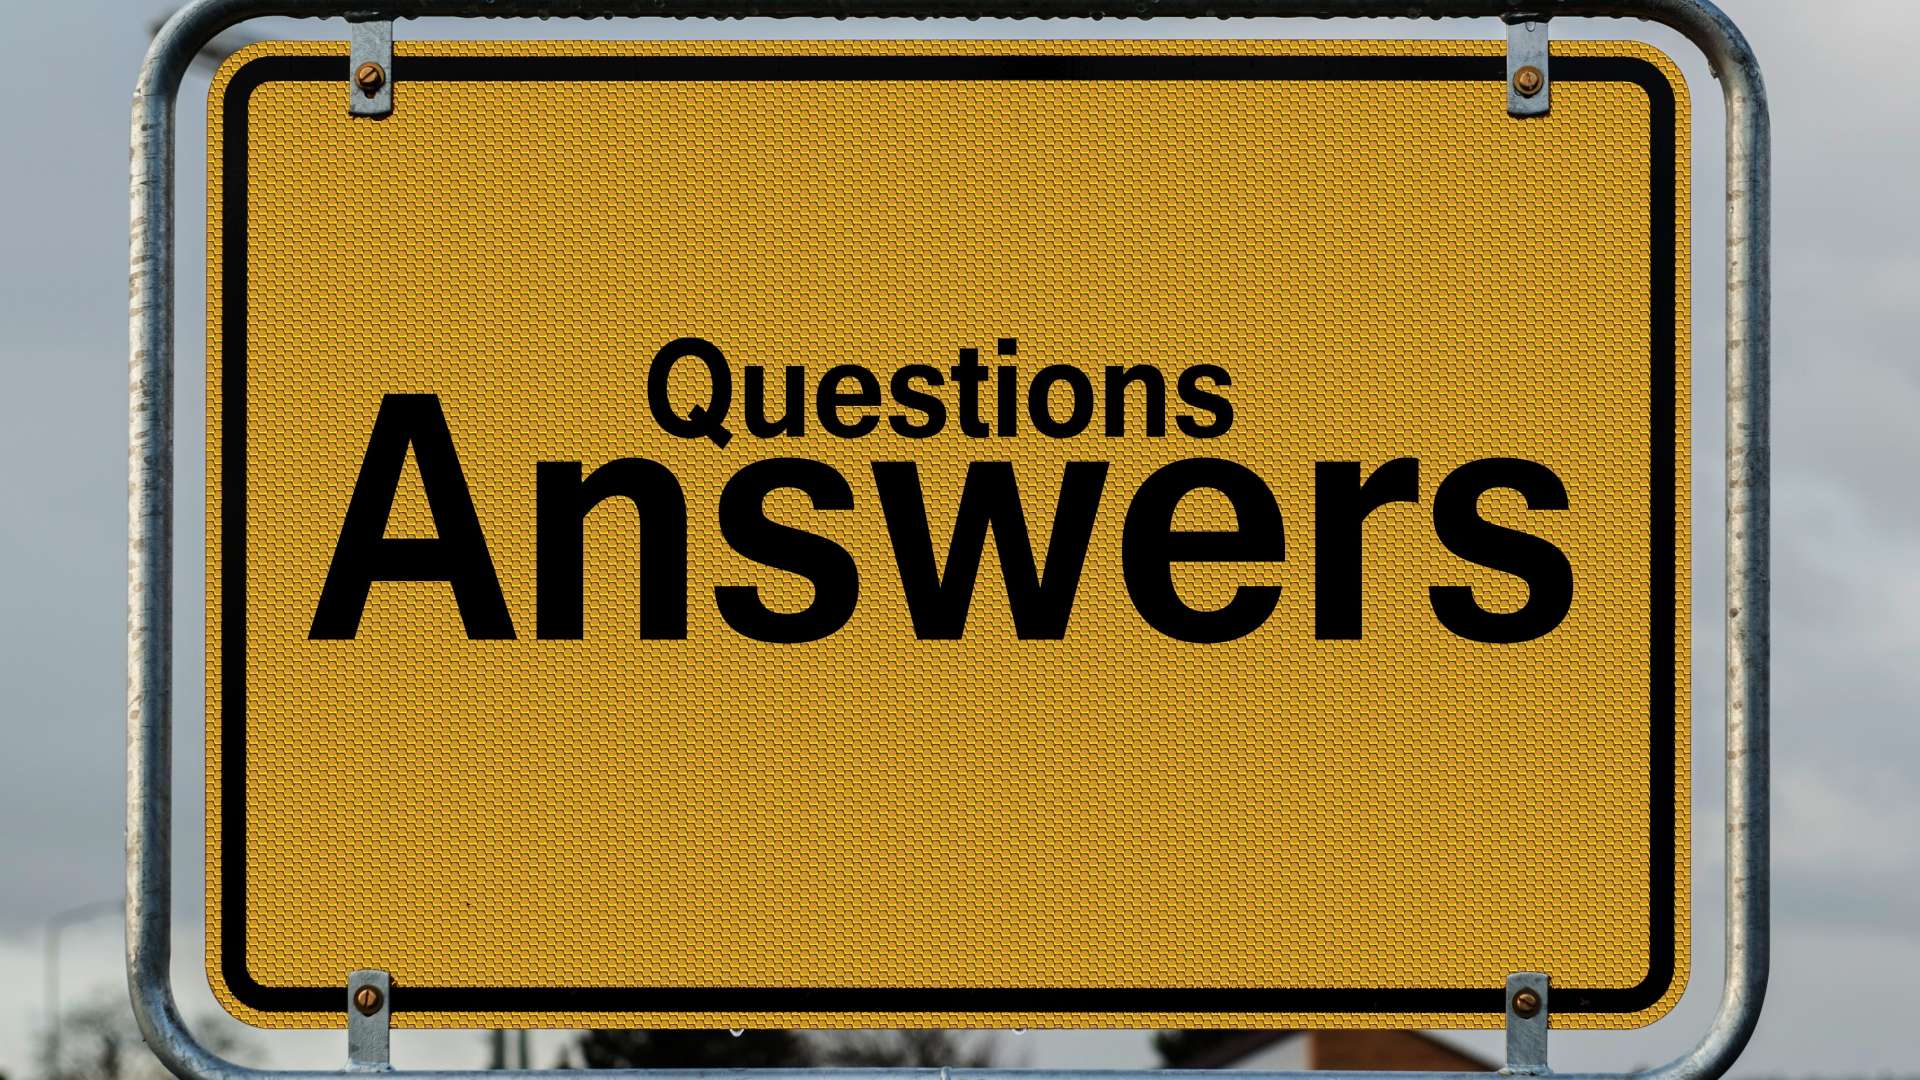 questions-answers-signage-208494